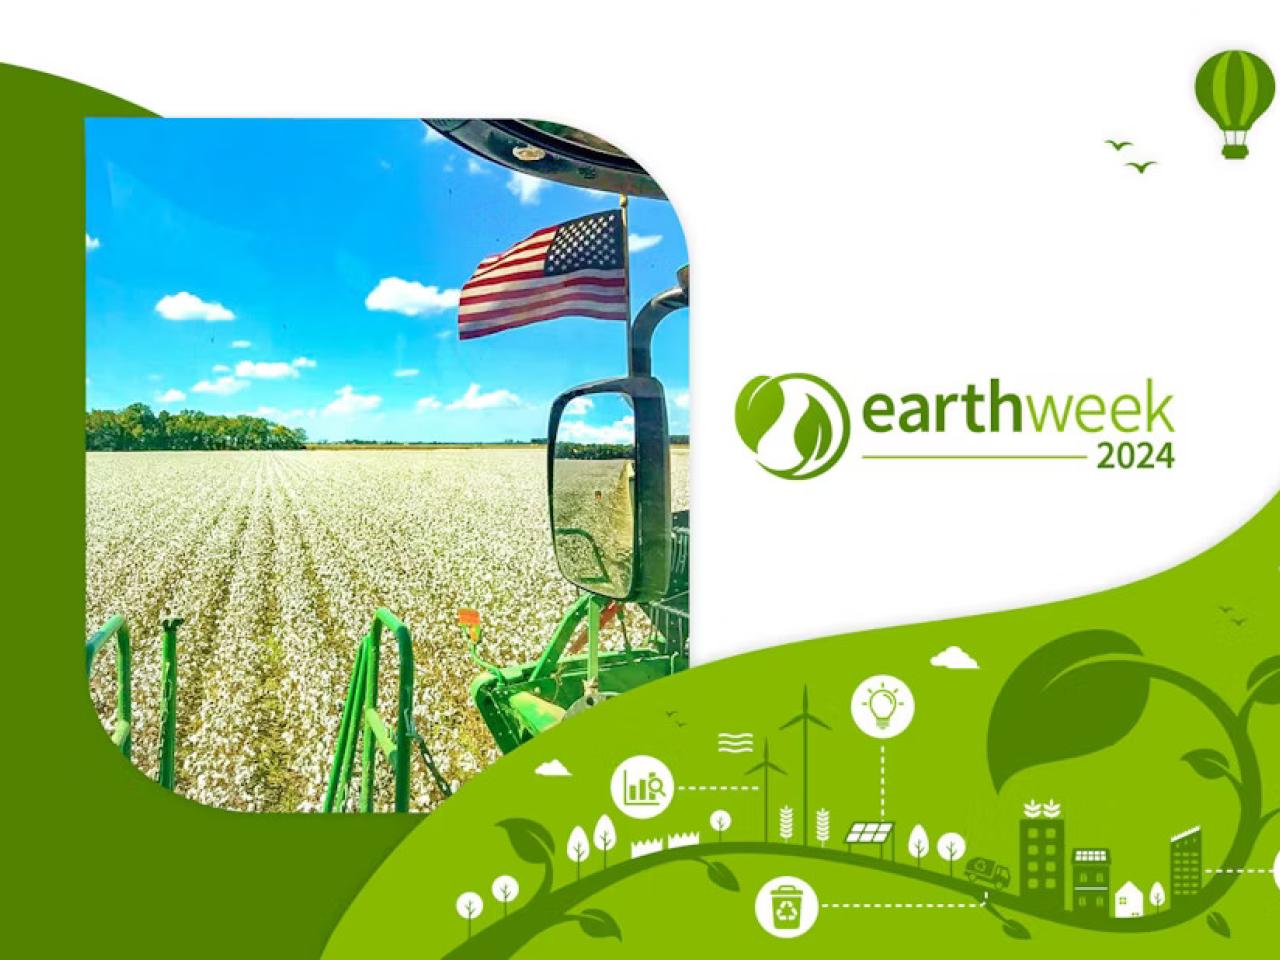 "earth week 2024" next to an american flag on a tractor in a field of crops.